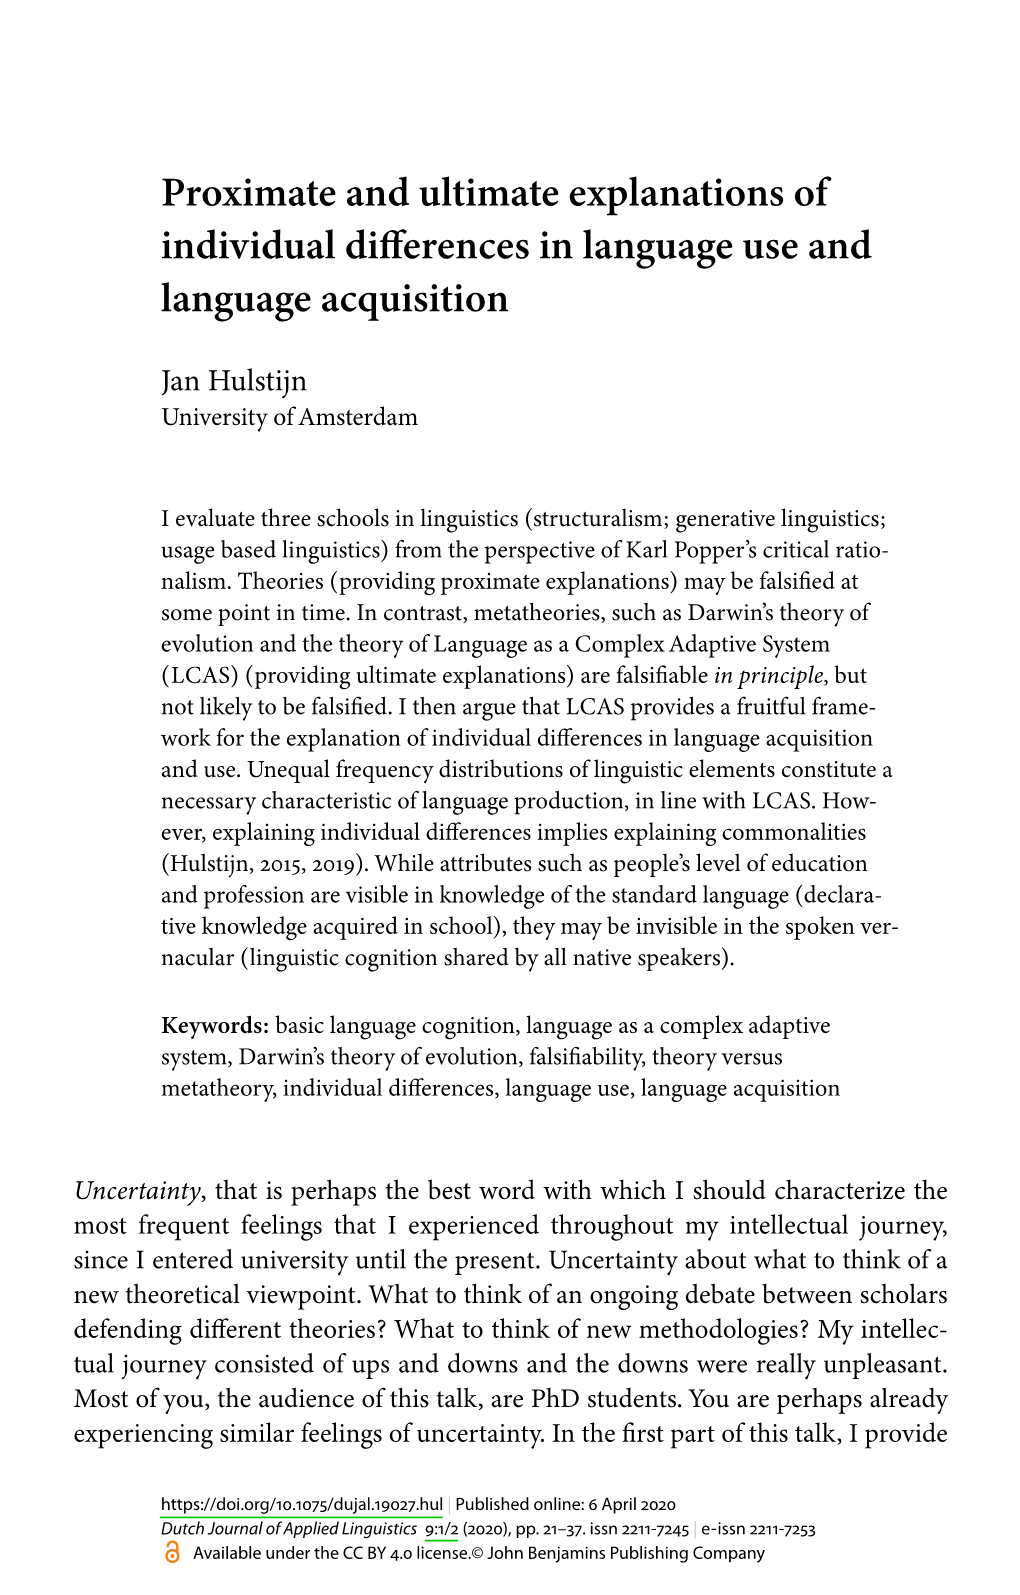 Proximate and Ultimate Explanations of Individual Differences in Language Use and Language Acquisition